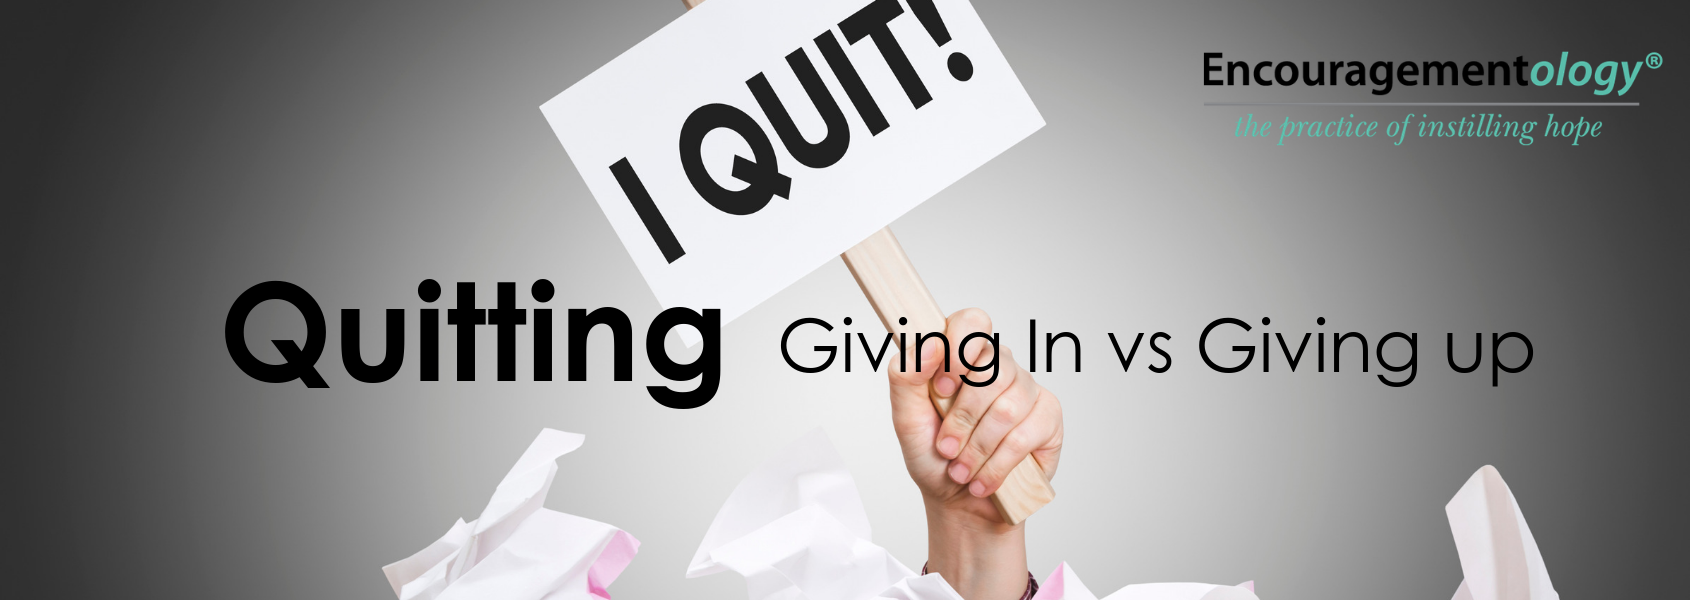 Quitting, Giving In vs Giving Up